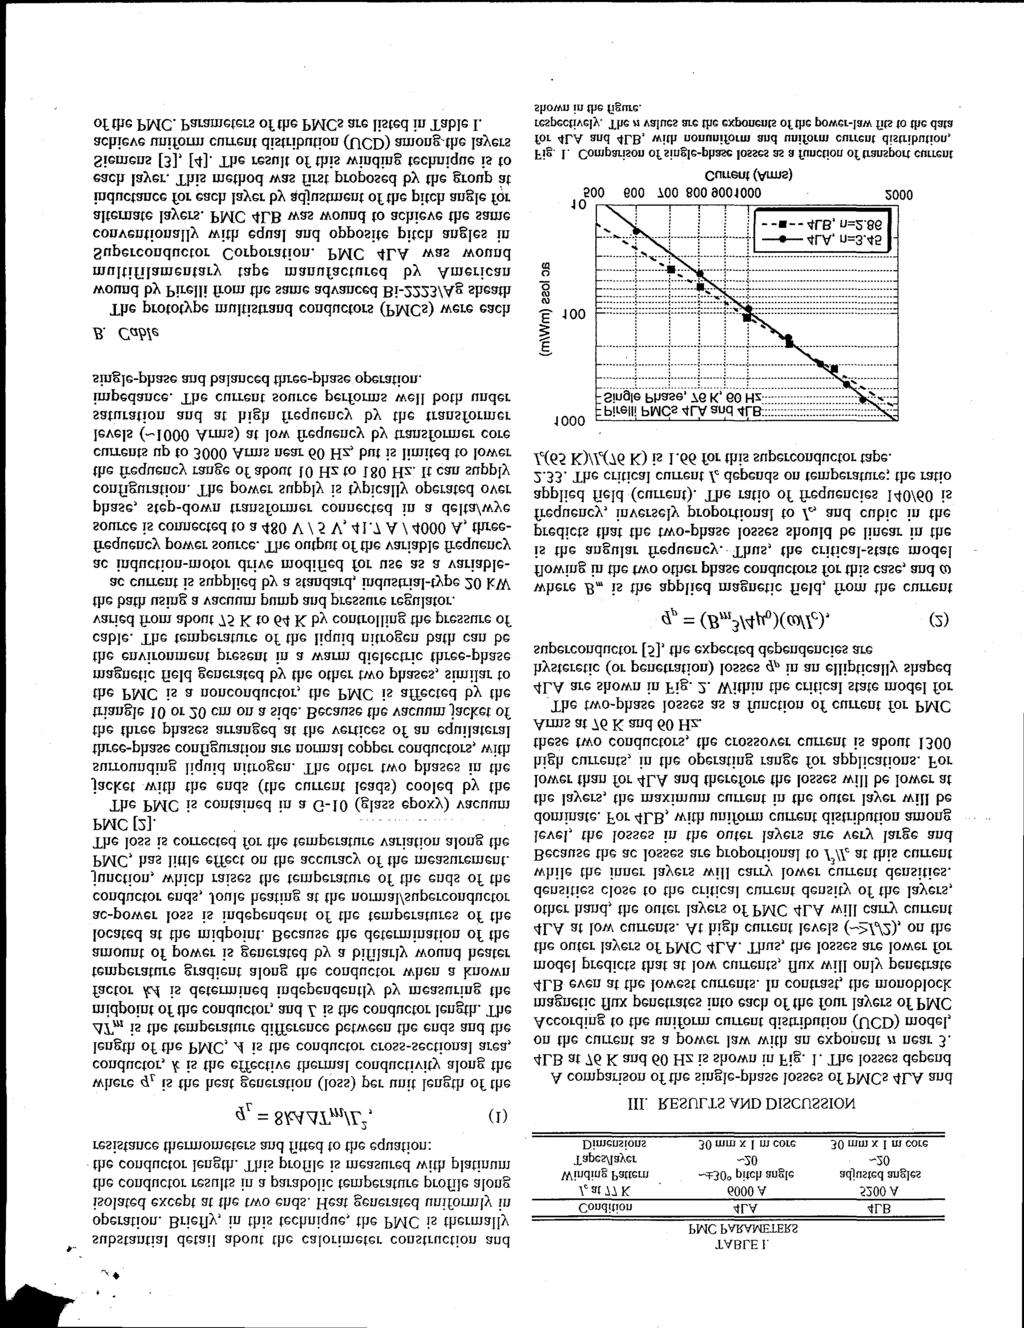 *. J+ substantial detail about the calorimeter construction and operation. Briefly, in this technique, the PMC is thermally isolated except at the two ends.